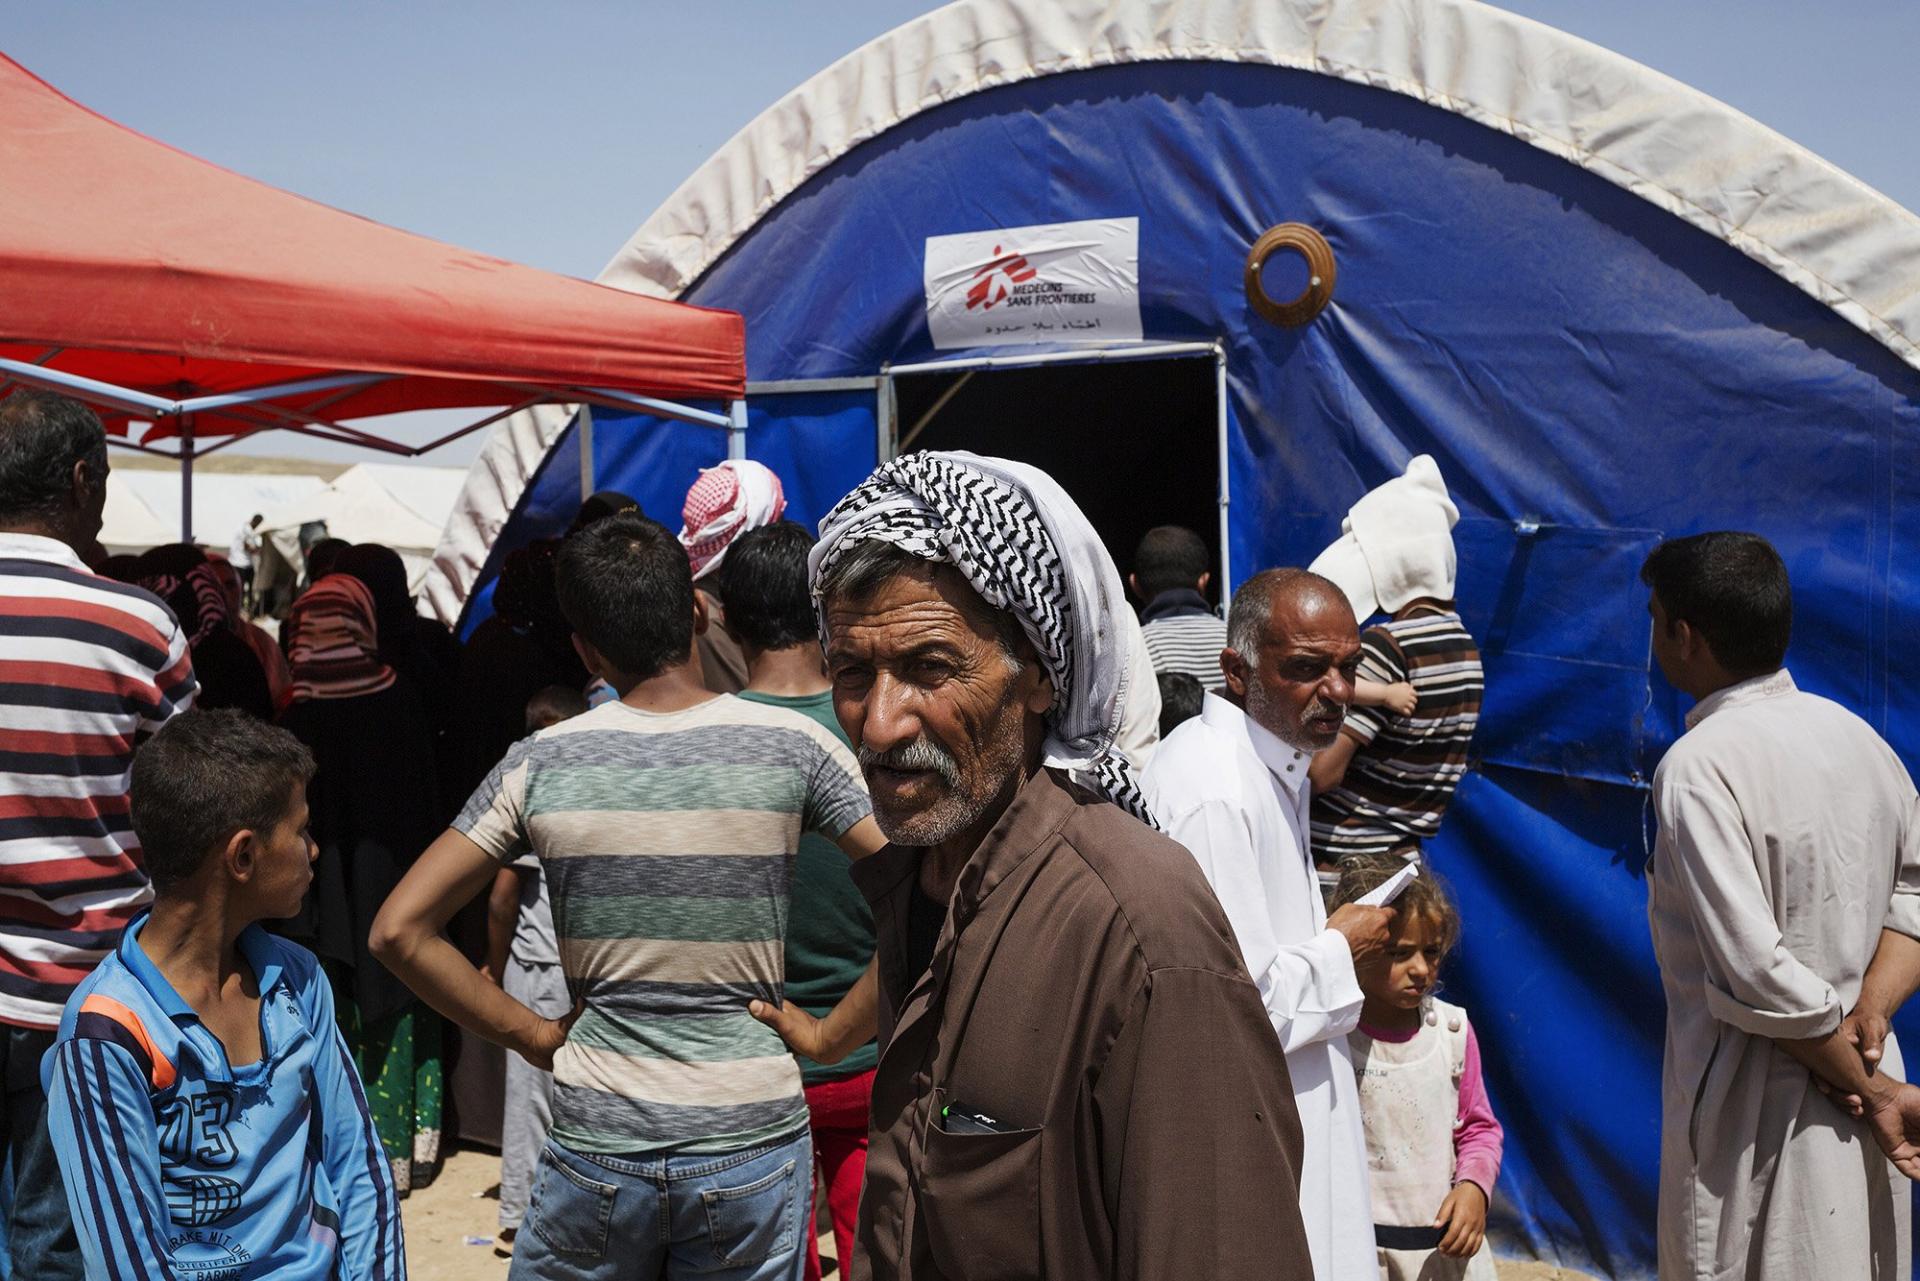 Iraq: “By the end, we were eating grass” | MSF